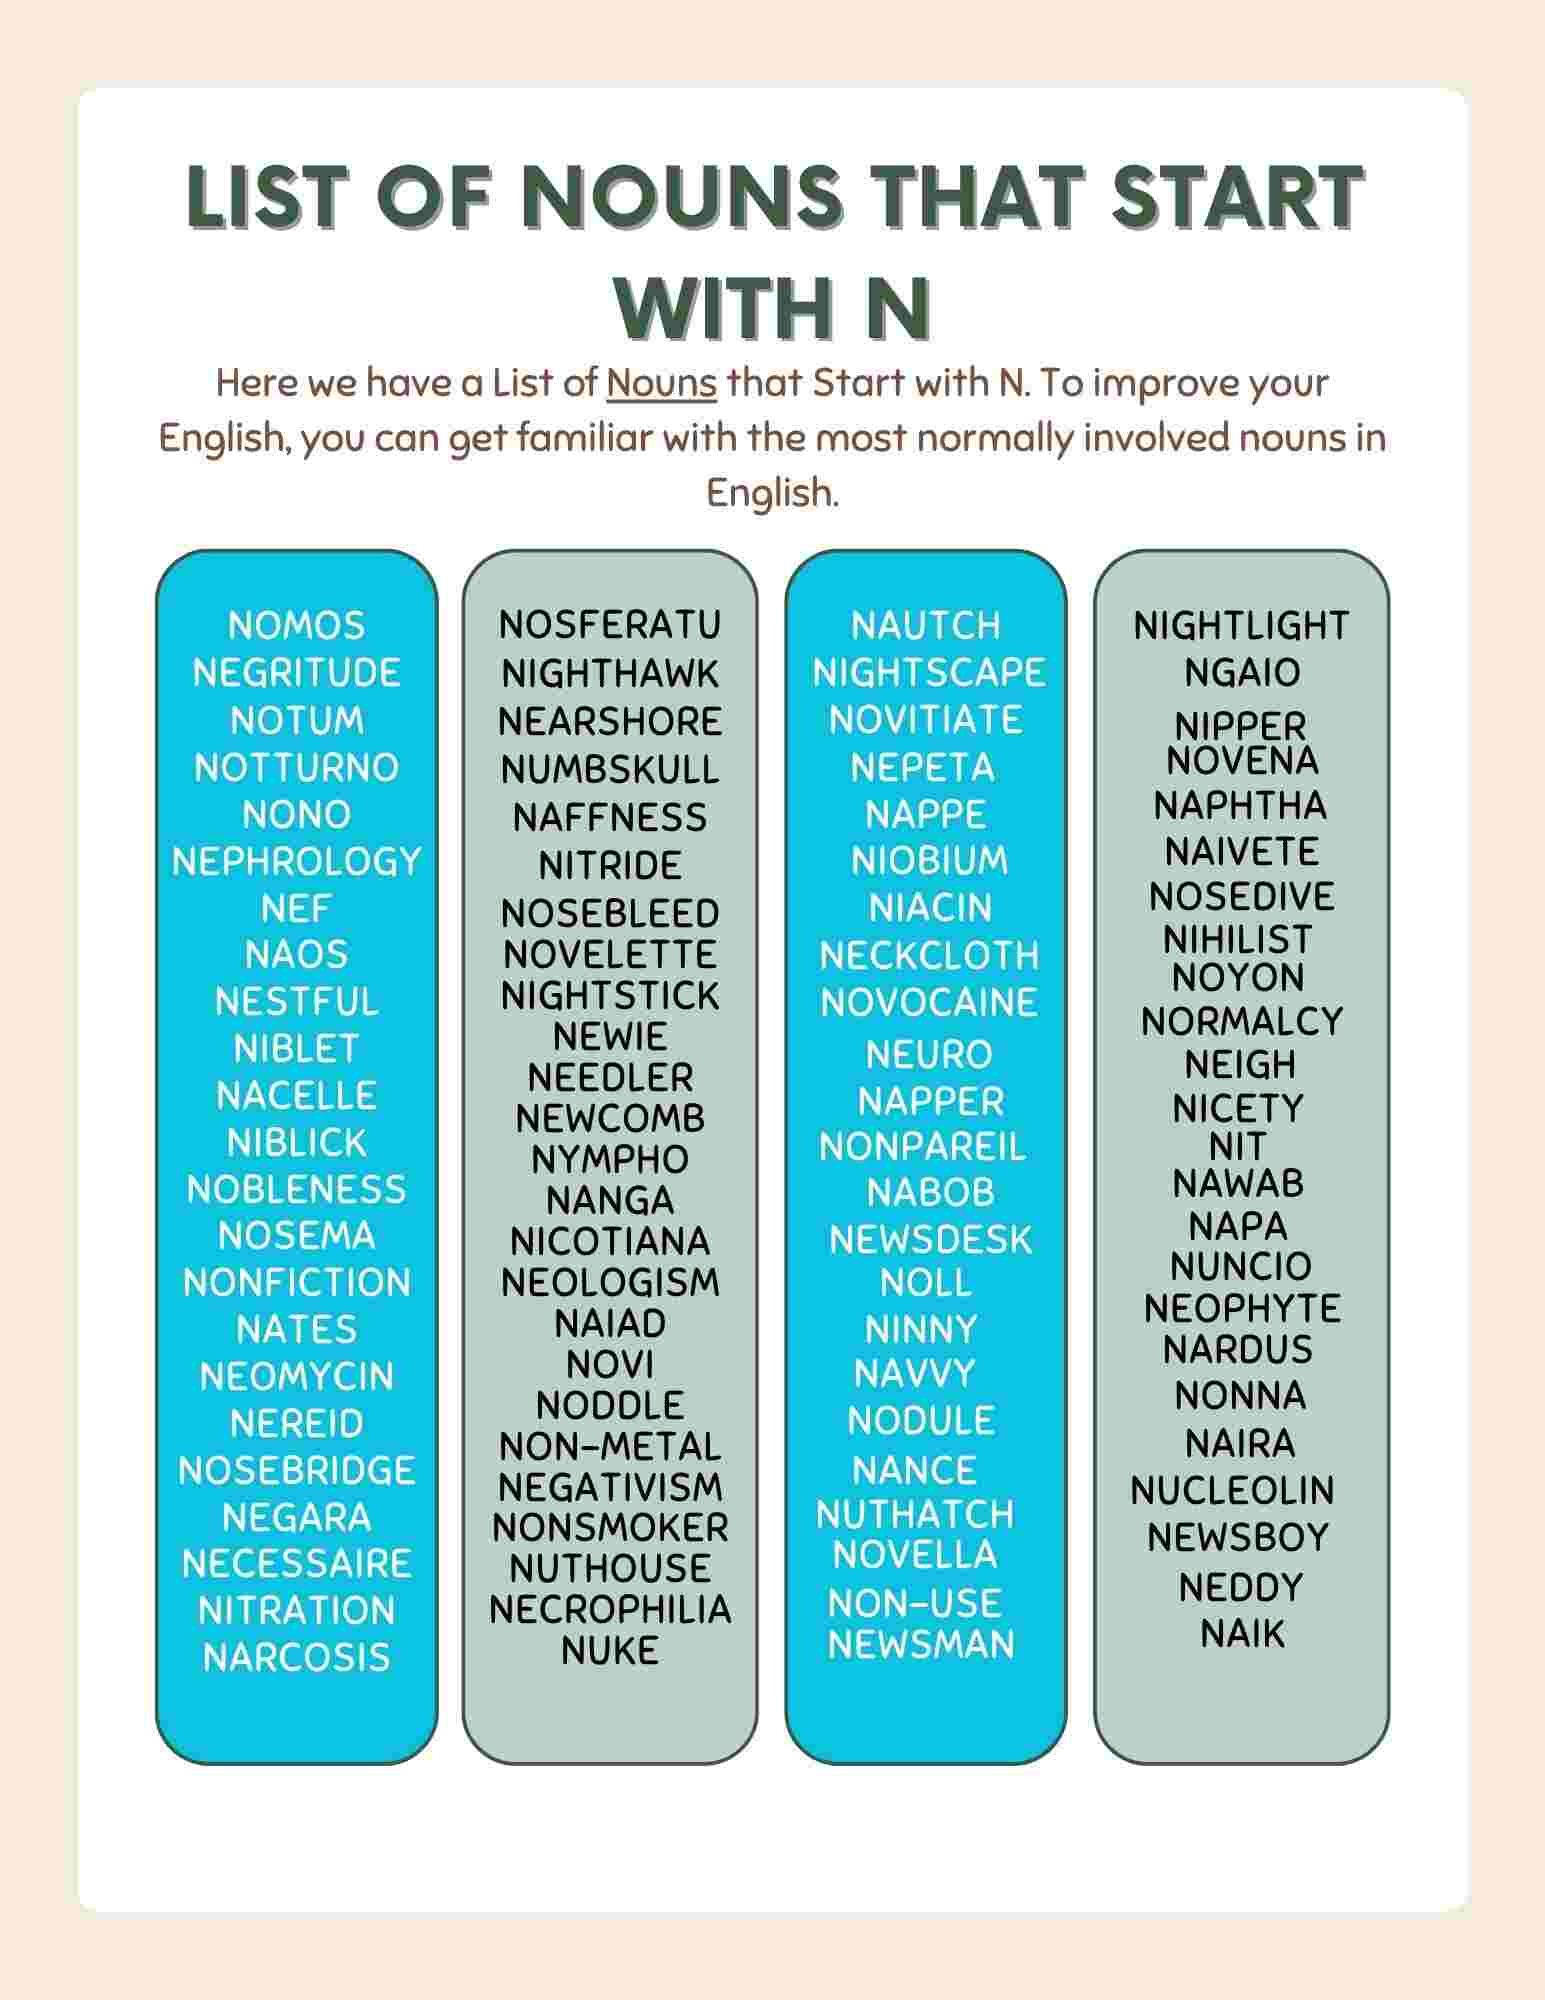 Nouns that Start With N